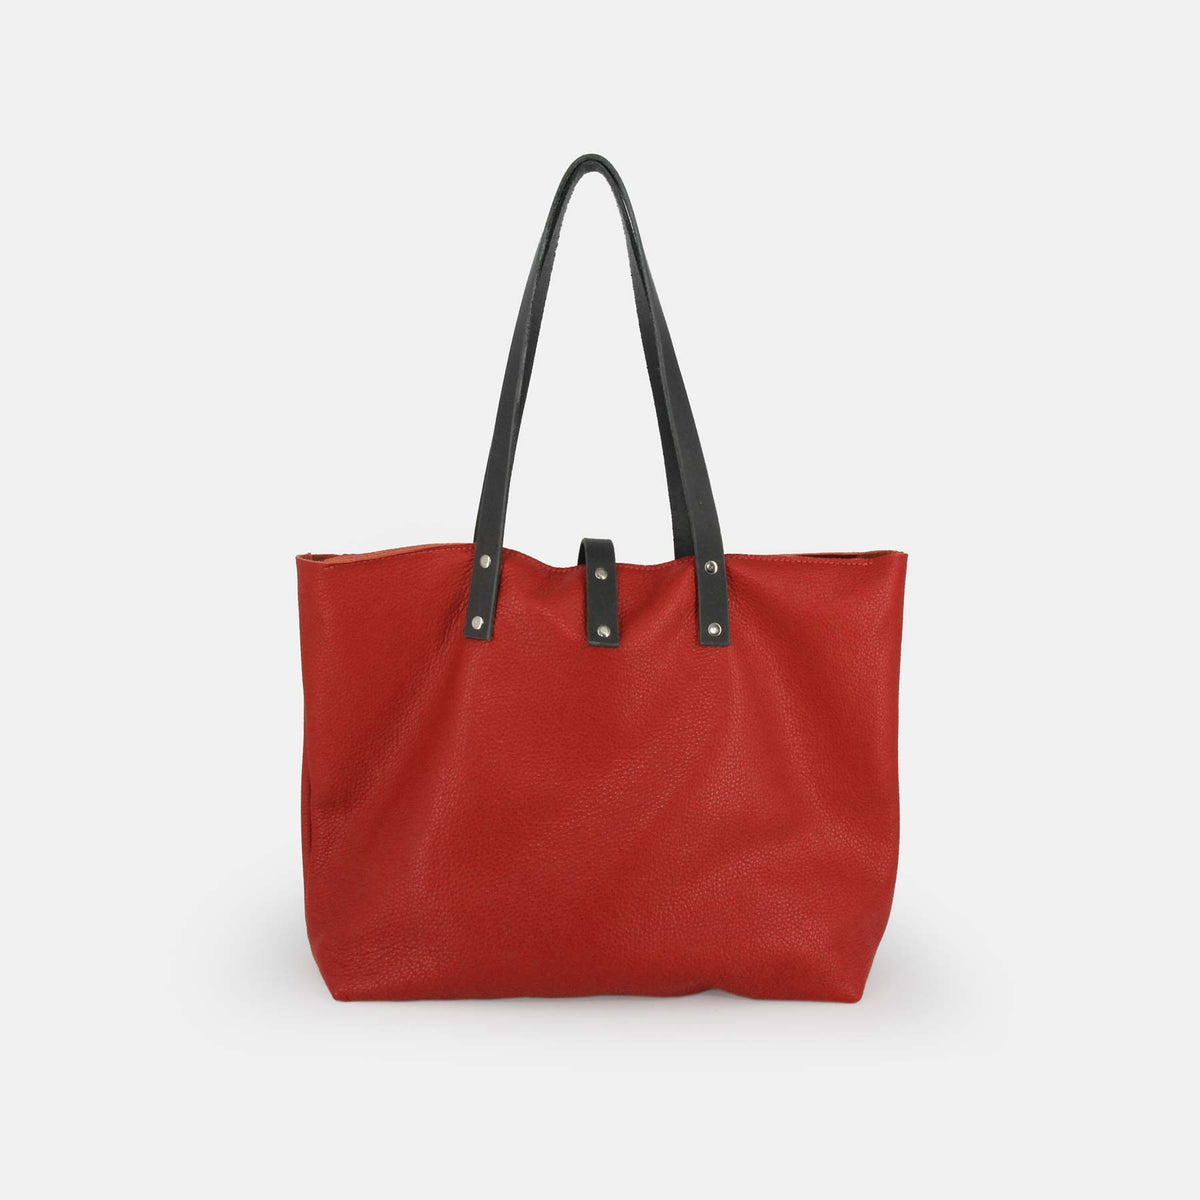 Soft Italian Leather Tote with Zip - Red - RYAN London